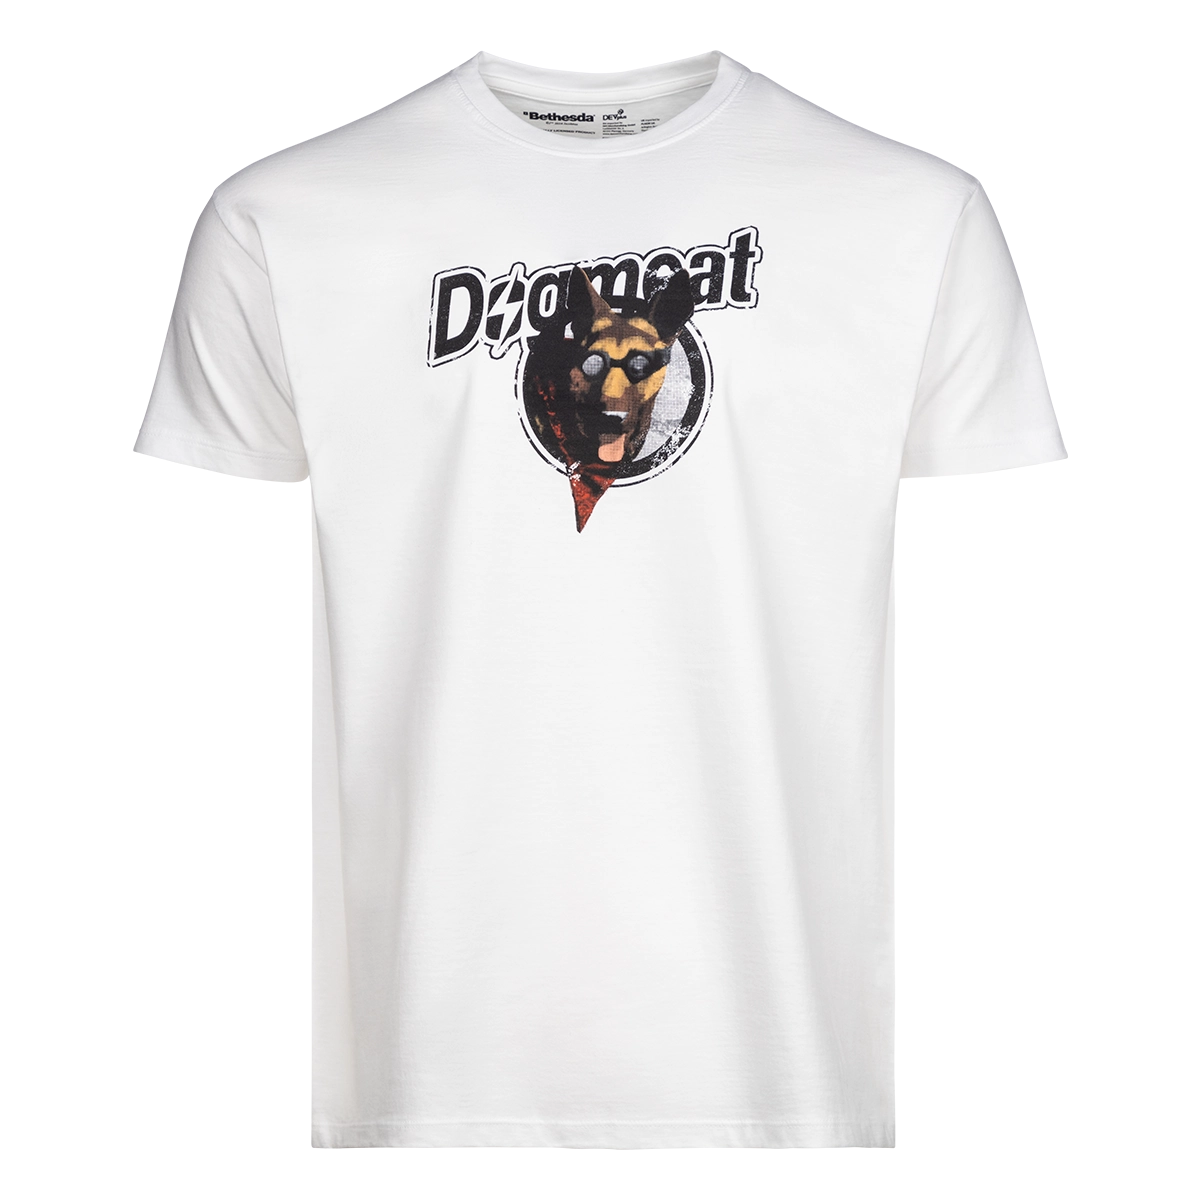 Fallout T-Shirt "Dogmeat" white S Cover